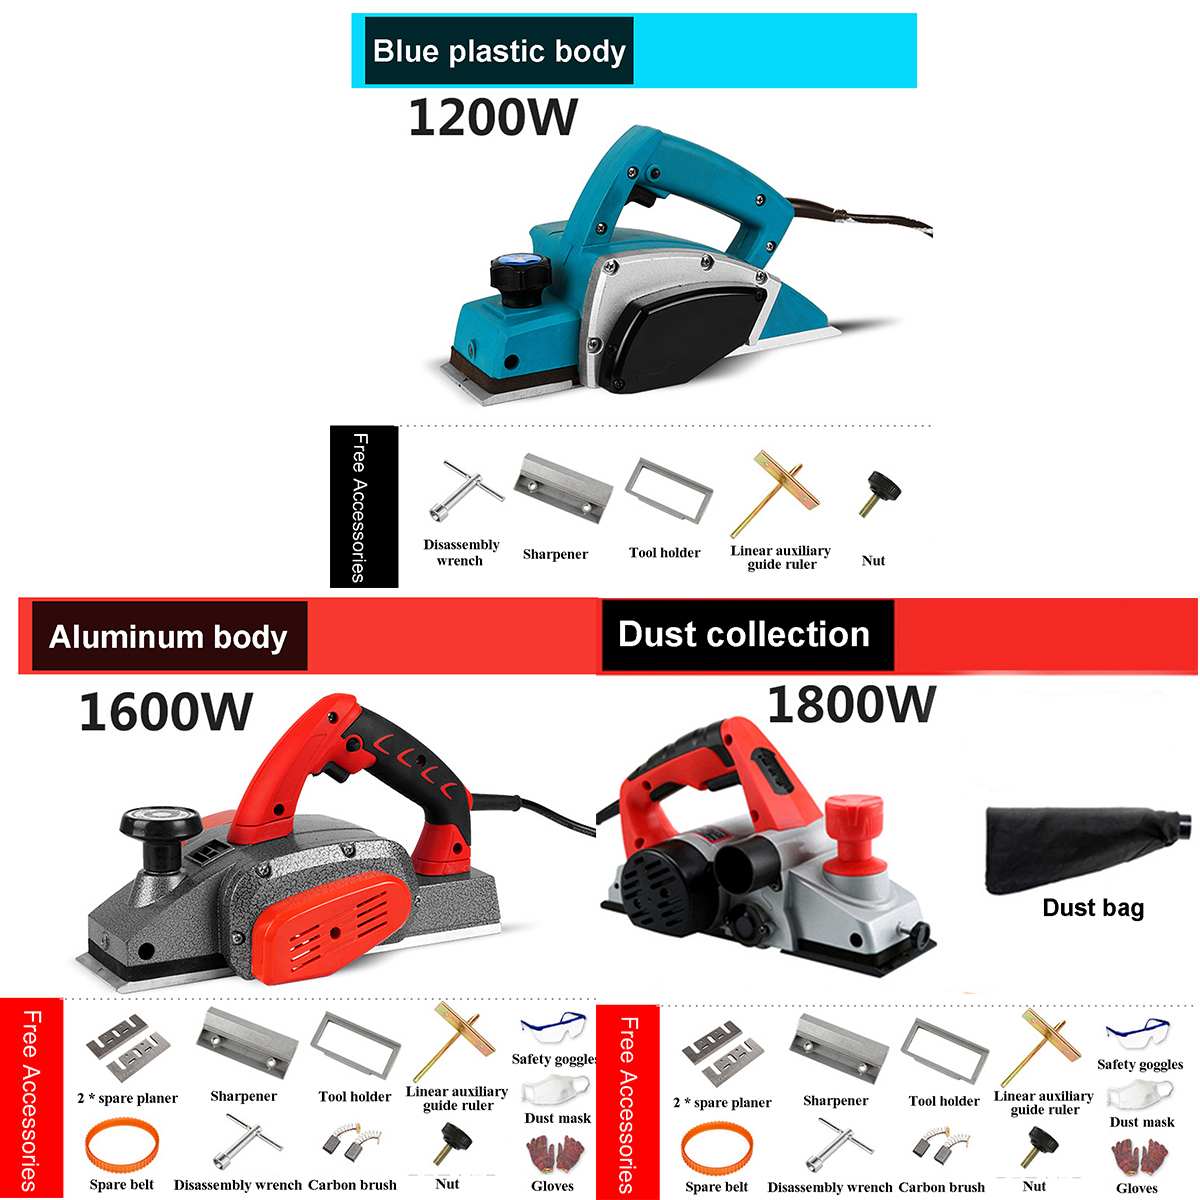 Drillrpo 1200W/1600W/1800W Electric Planer Powerful Multifunctional Wood Planer HandHeld Copper Wire Carpenter Woodworking DIY